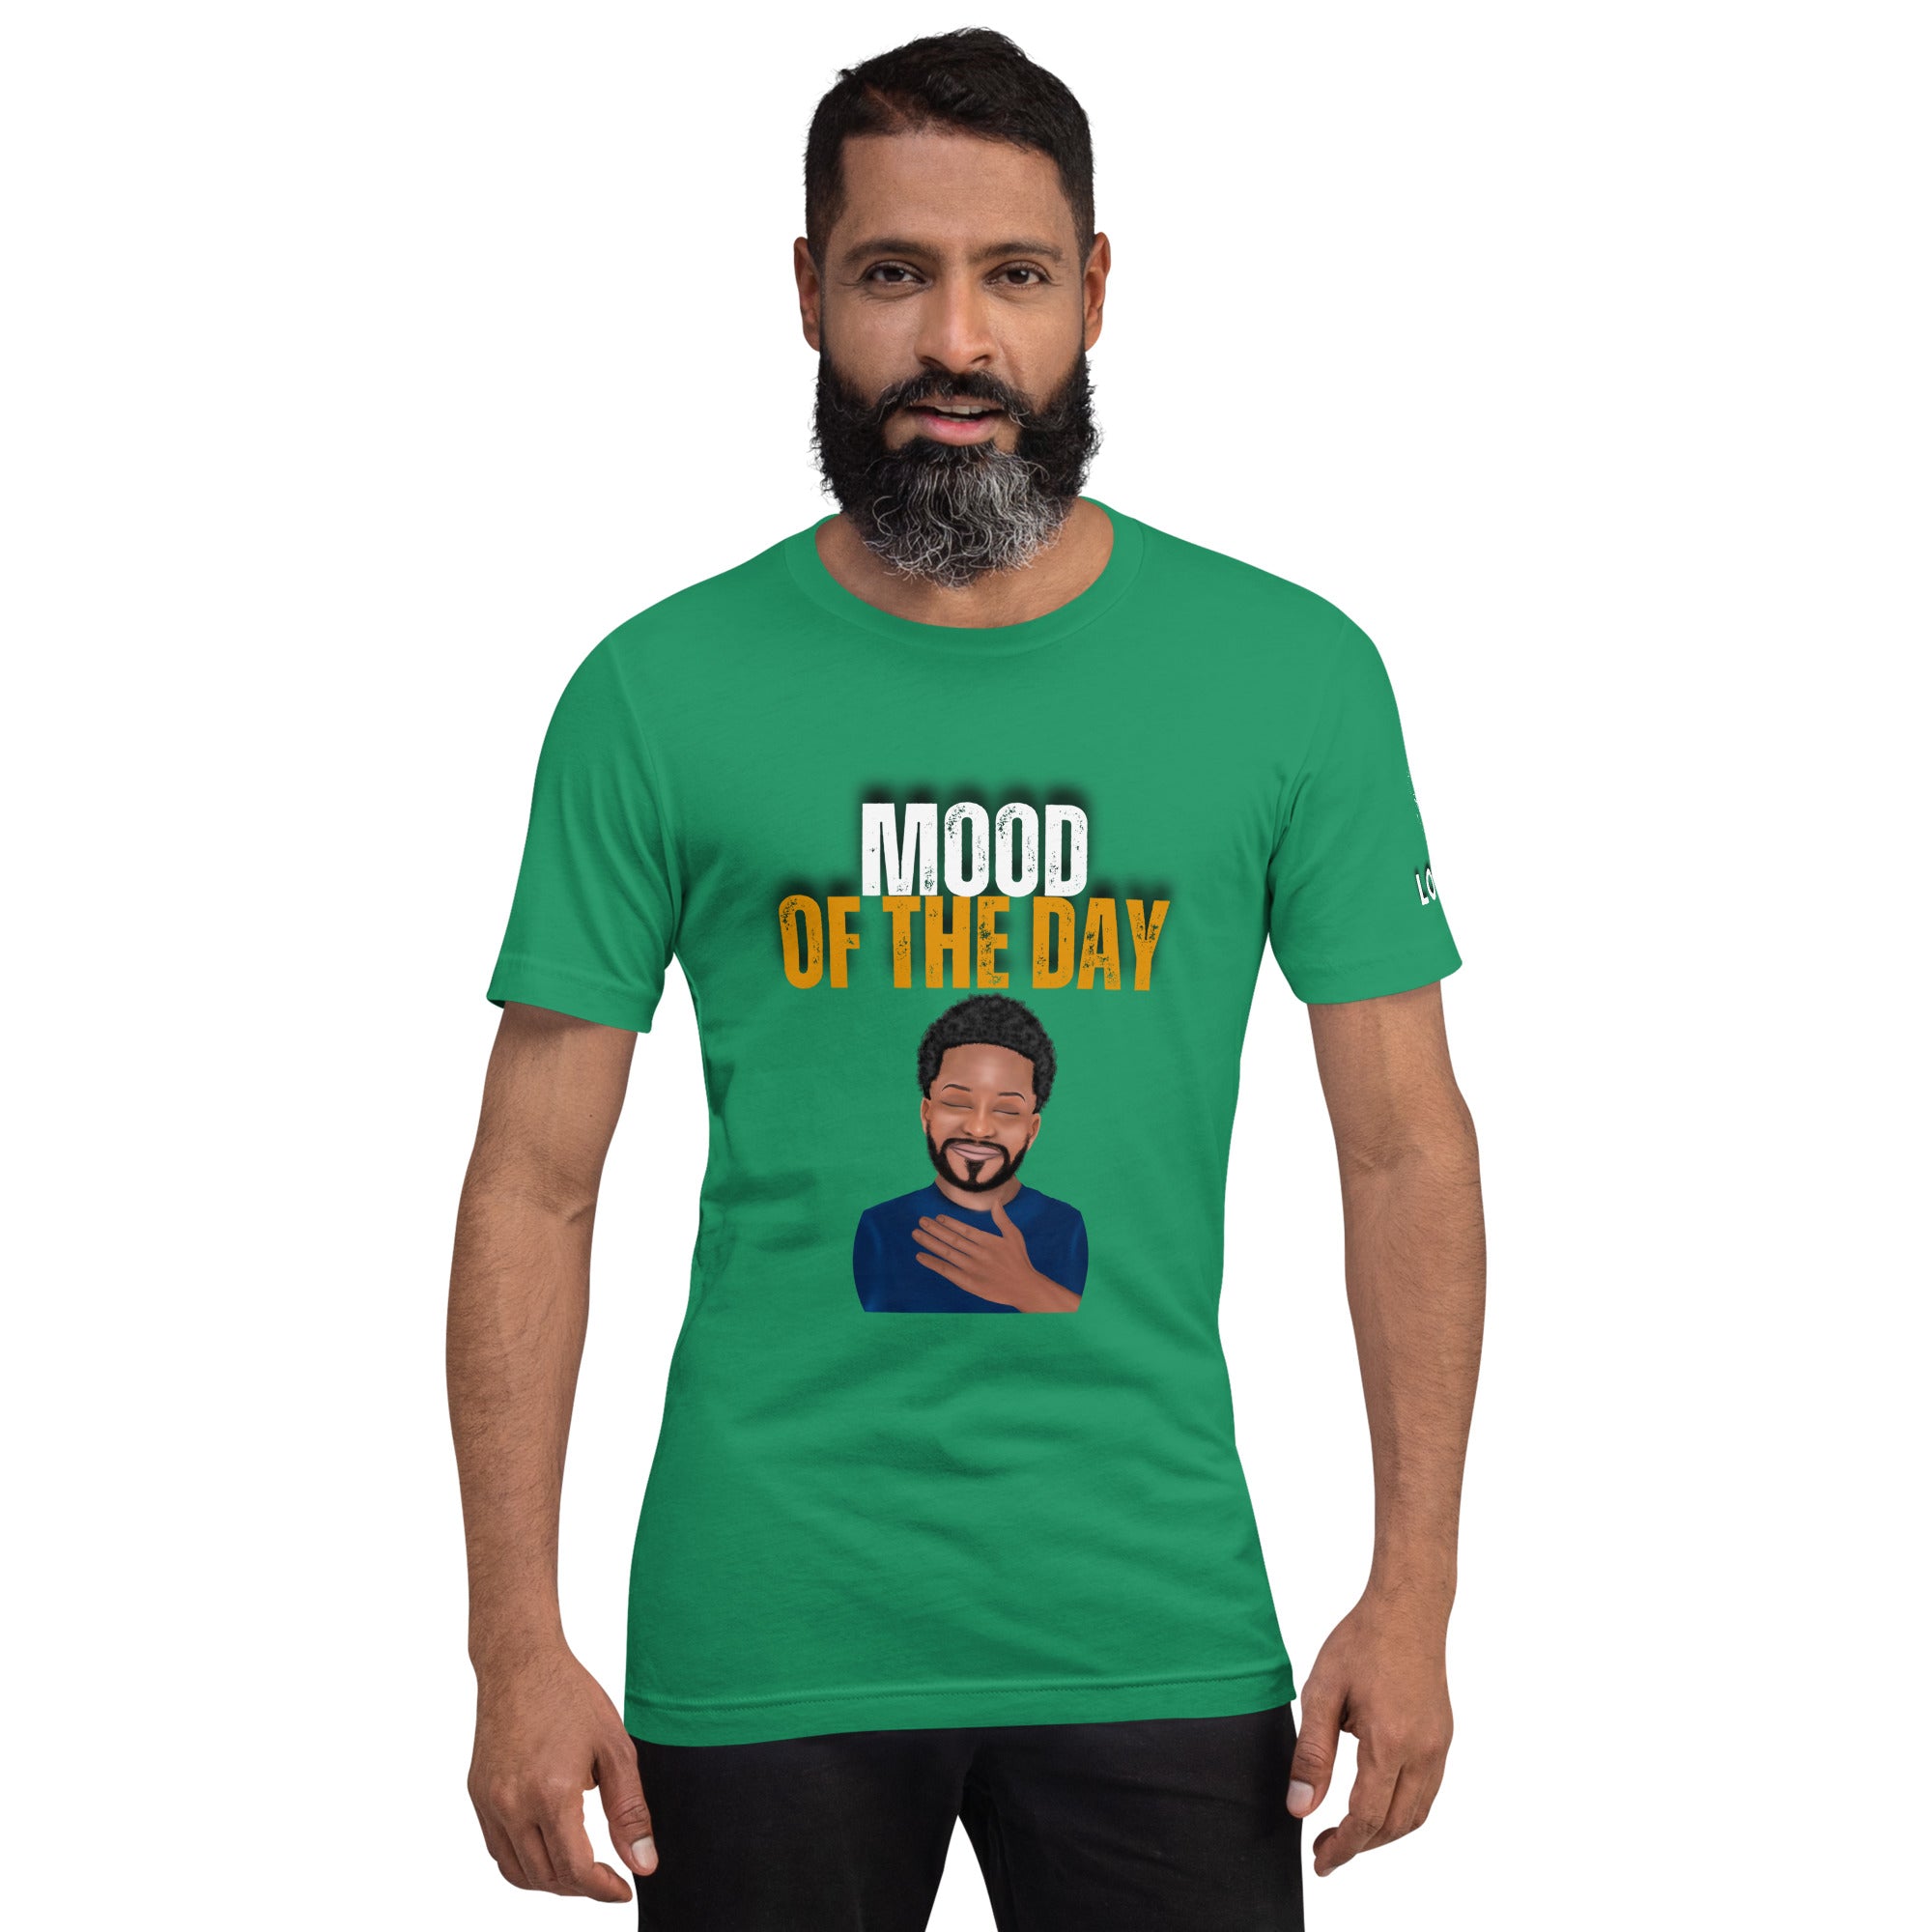 Mood of the Day T-shirt - Loved (Black Man)